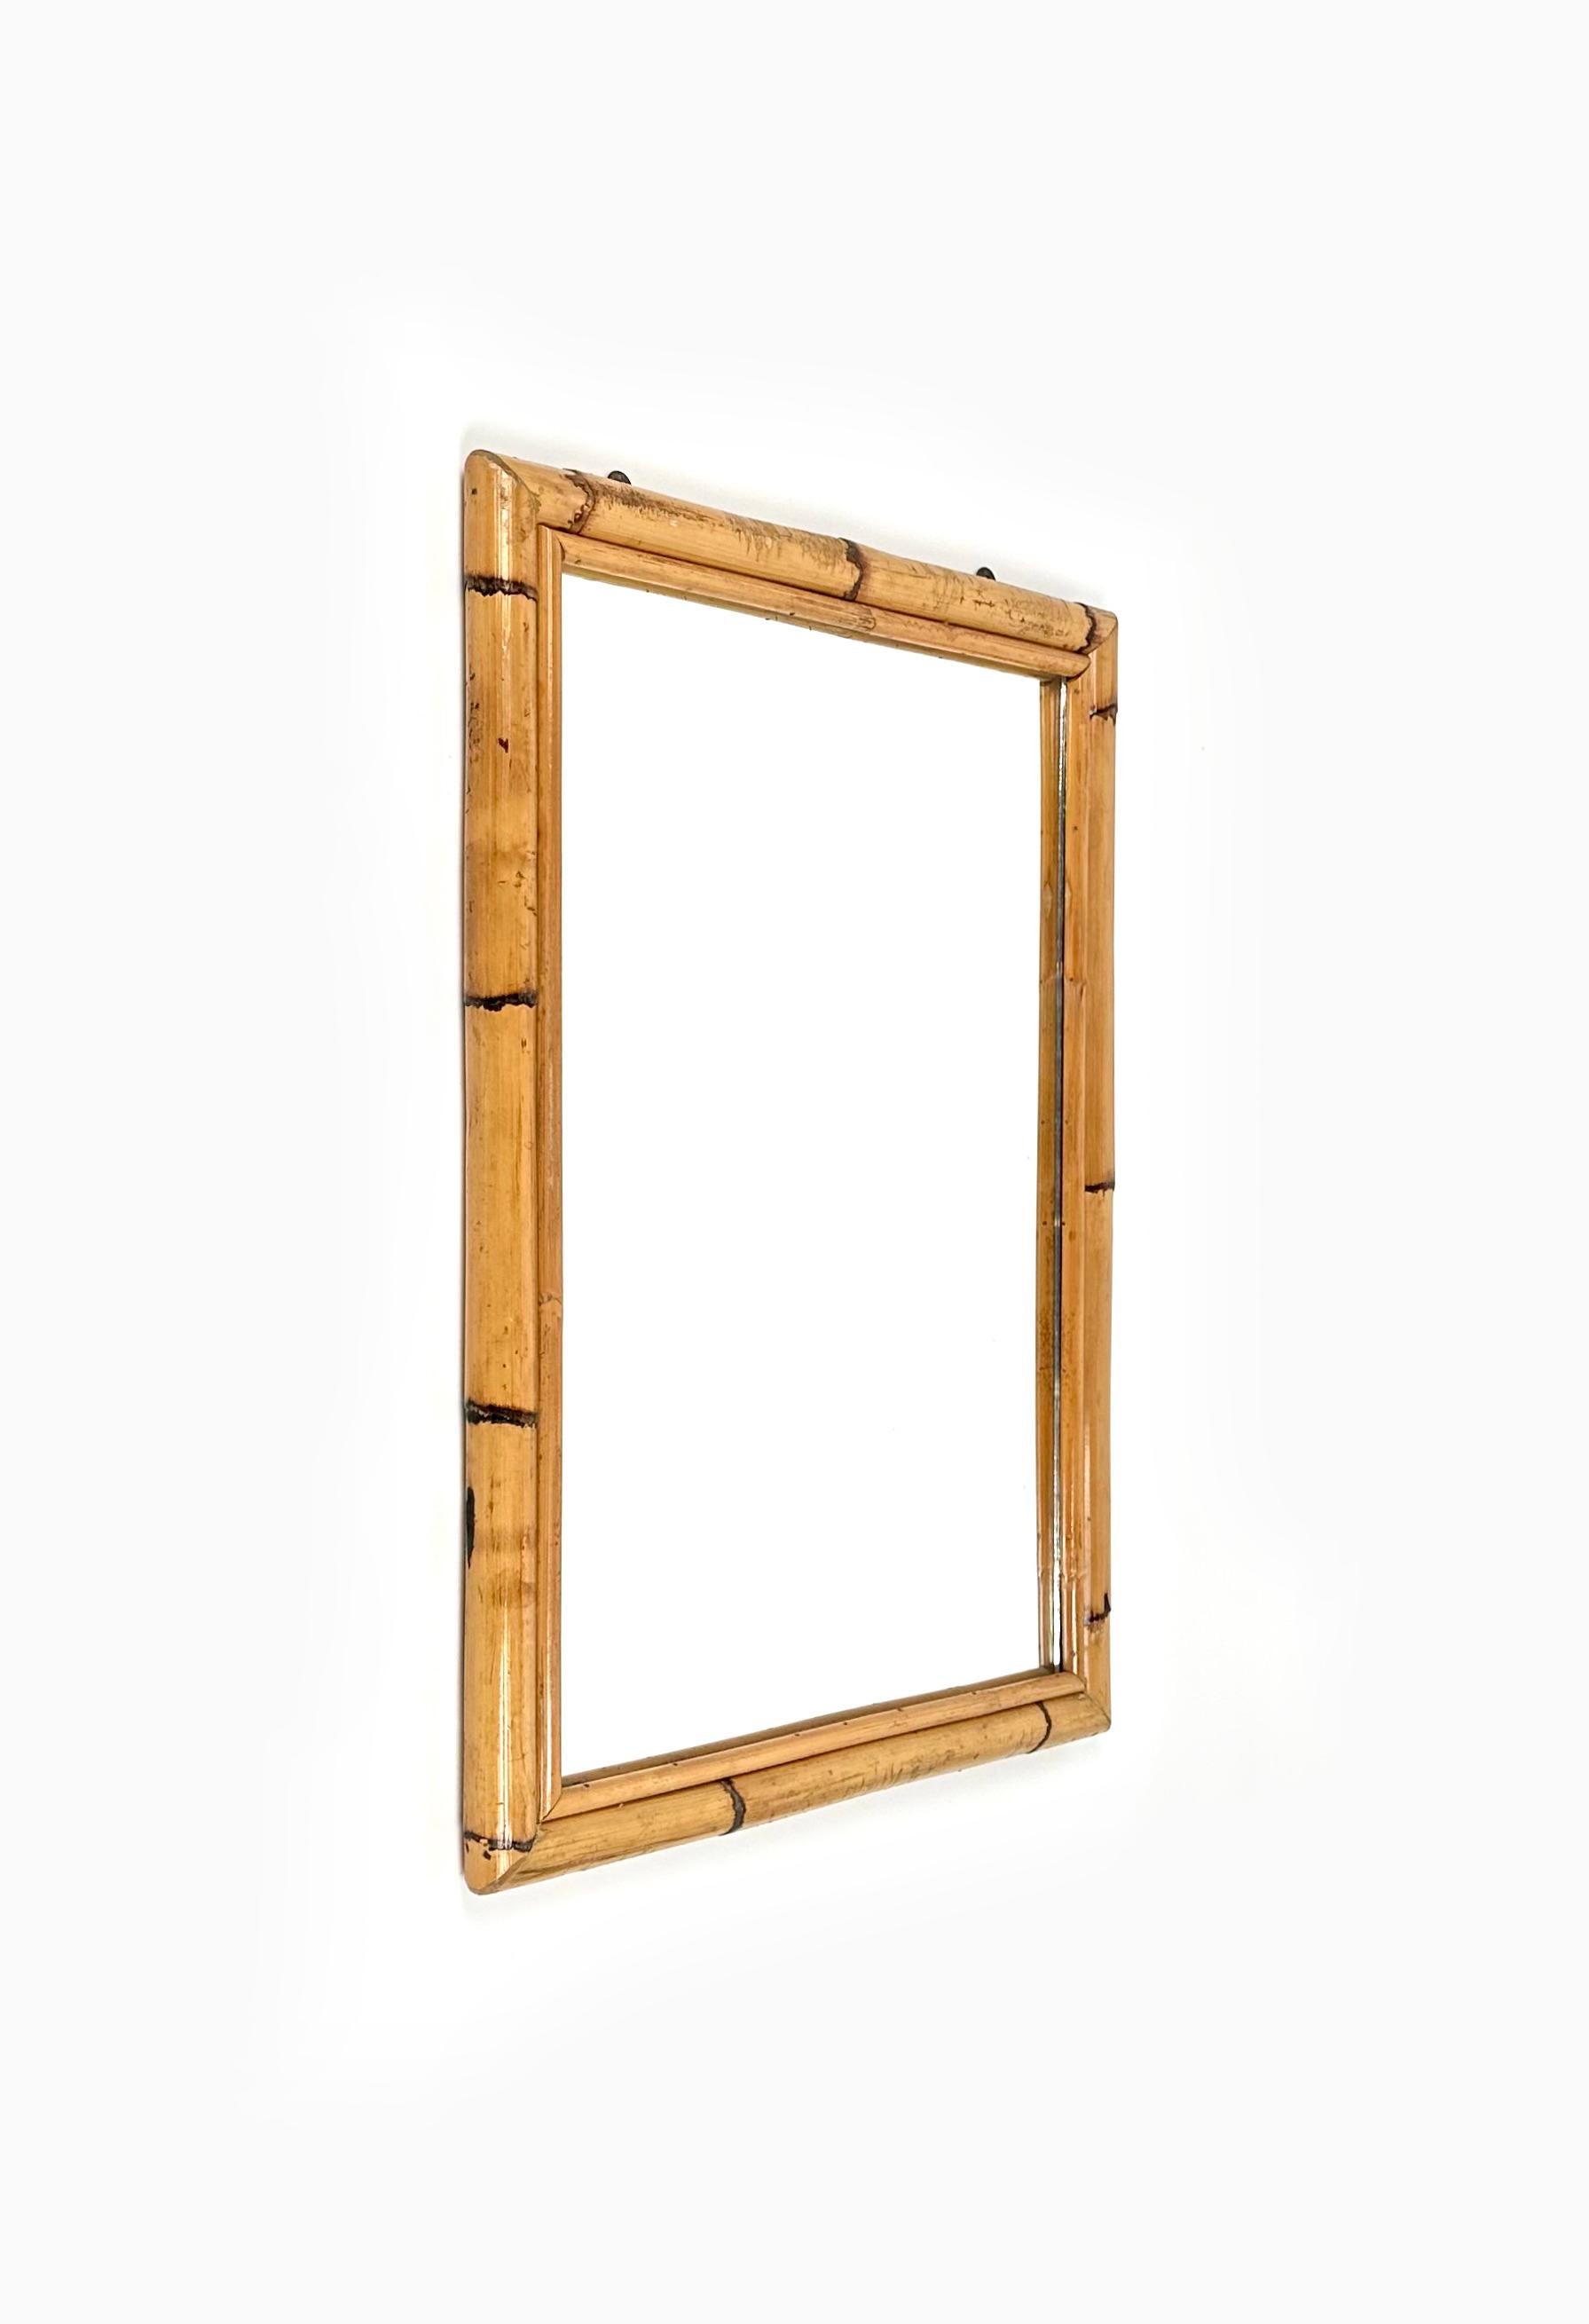 Beautiful rectangular wall mirror double bamboo frame.

Made in Italy in the 1970s.